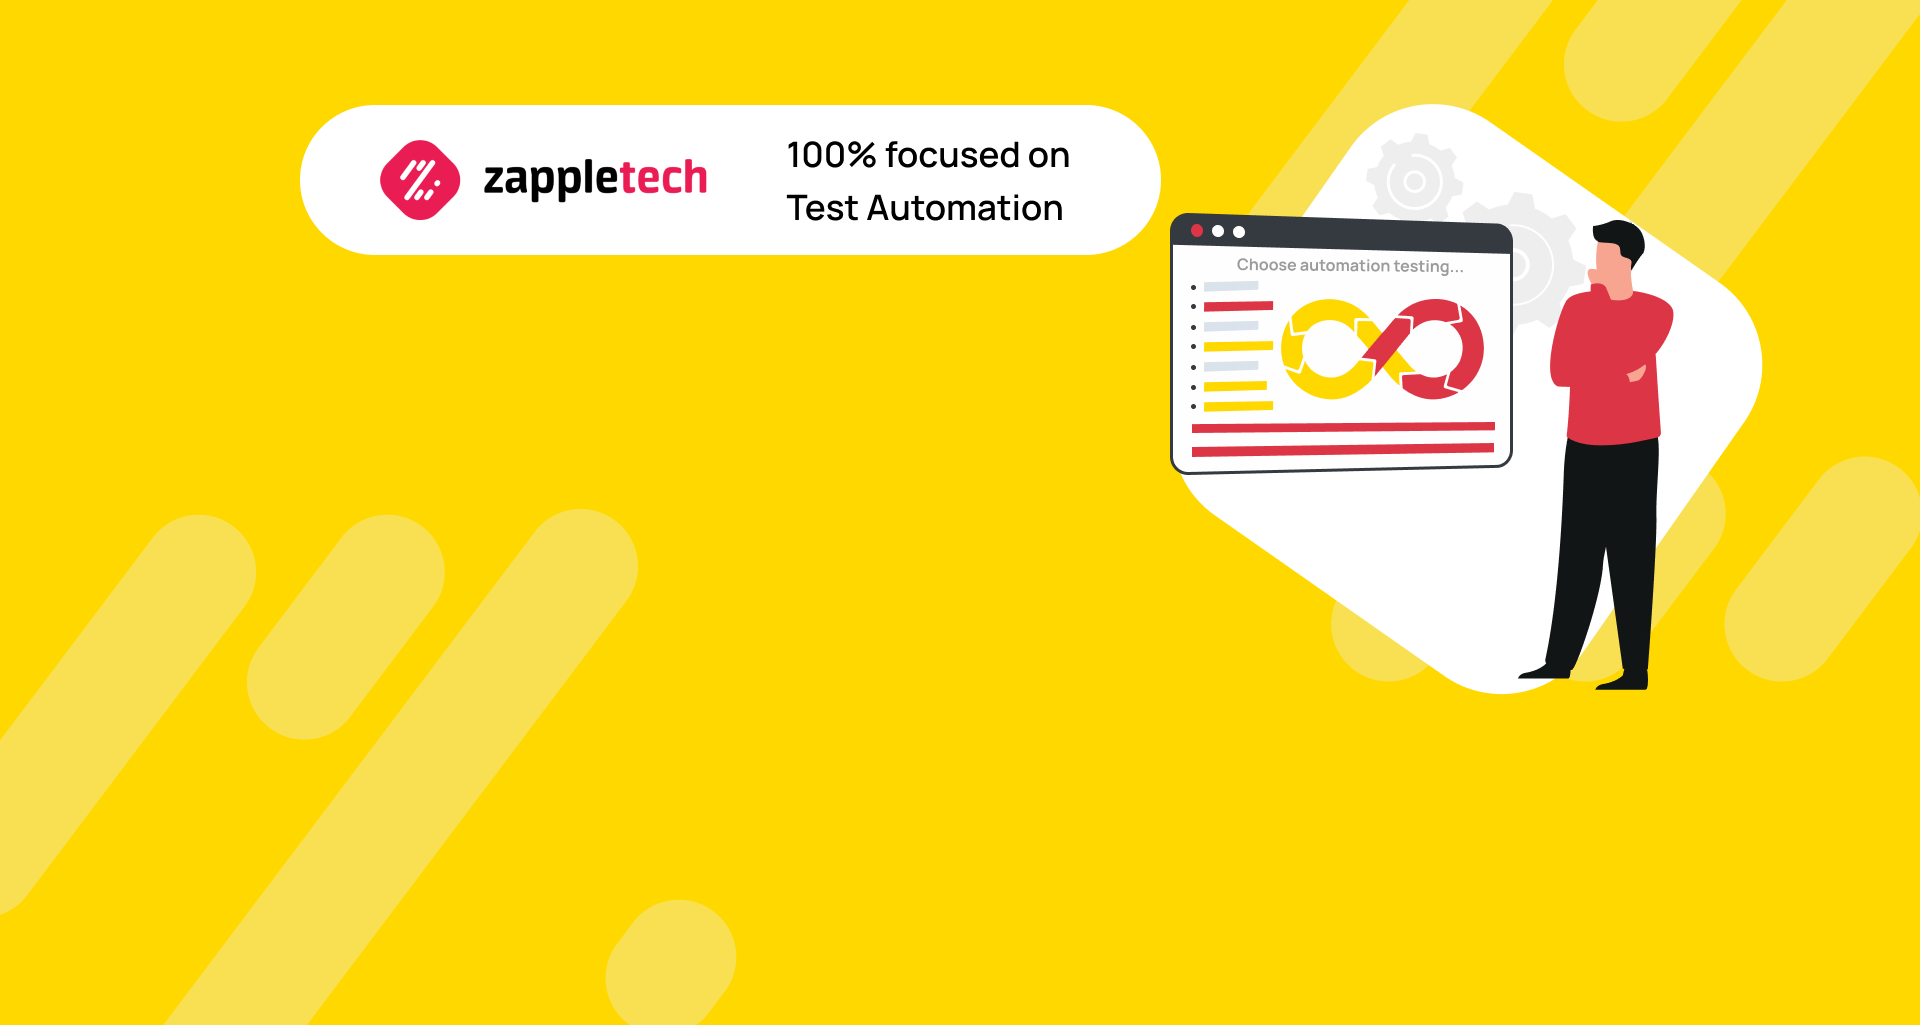 How To Choose Automation Testing Company: 7 Key Points